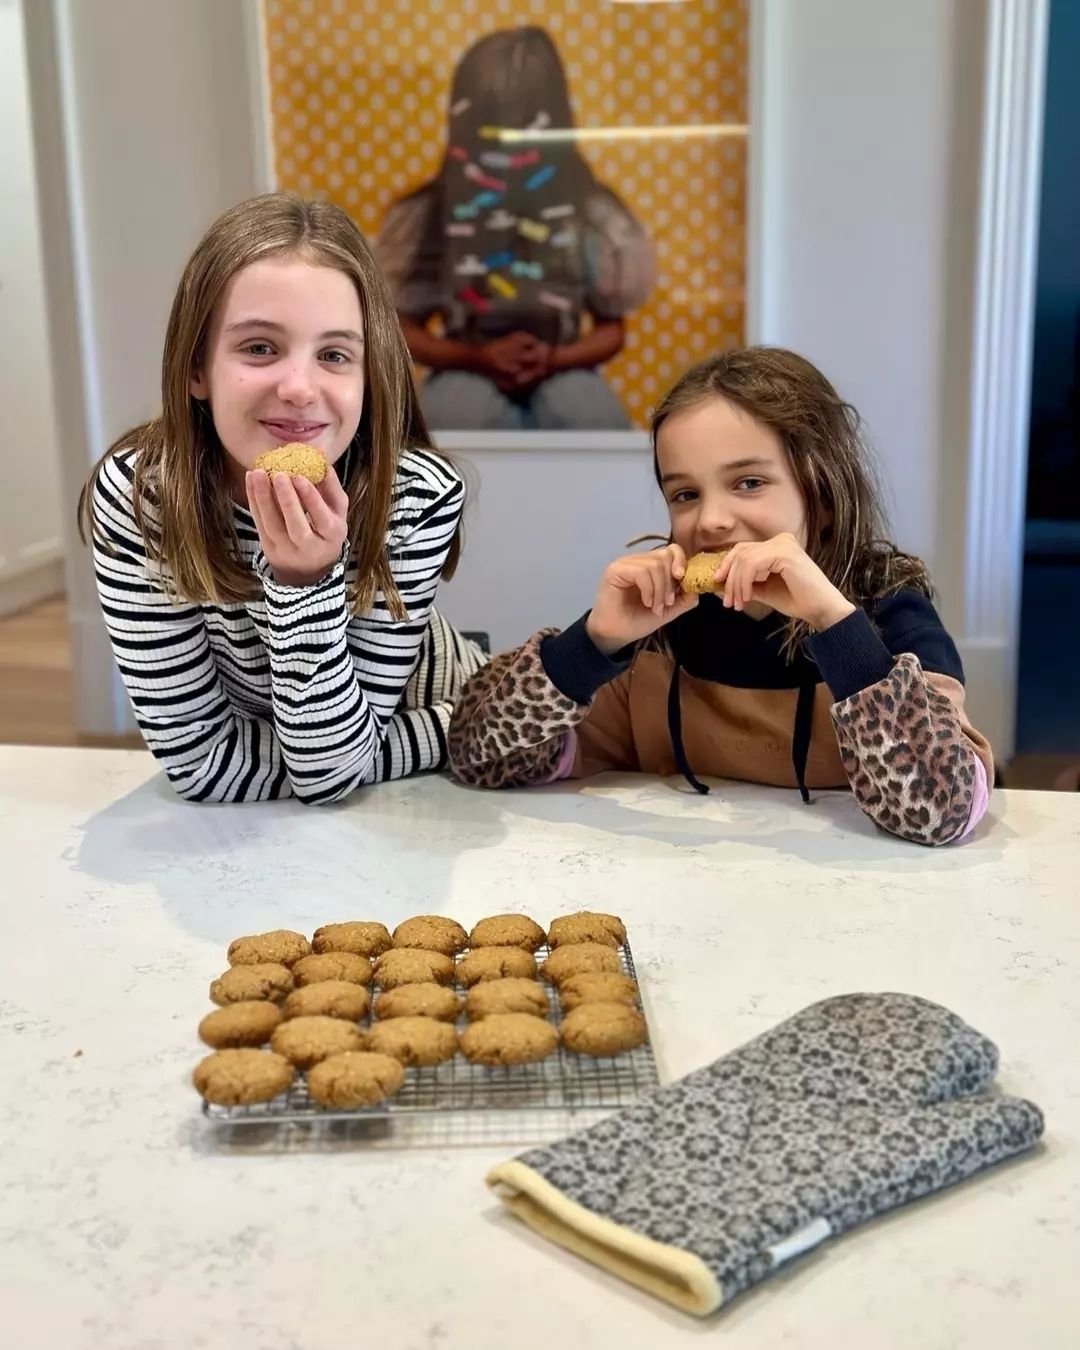 This week we've been making Brooke&rsquo;s Mums Anzac biscuits - these are always our morning tea of choice today. #lestweforget&nbsp;🌺 

Make a batch for your family, you&rsquo;ll love them! 💙

Brooke's Mums Anzac Biscuits
Ingredients:
120g butter